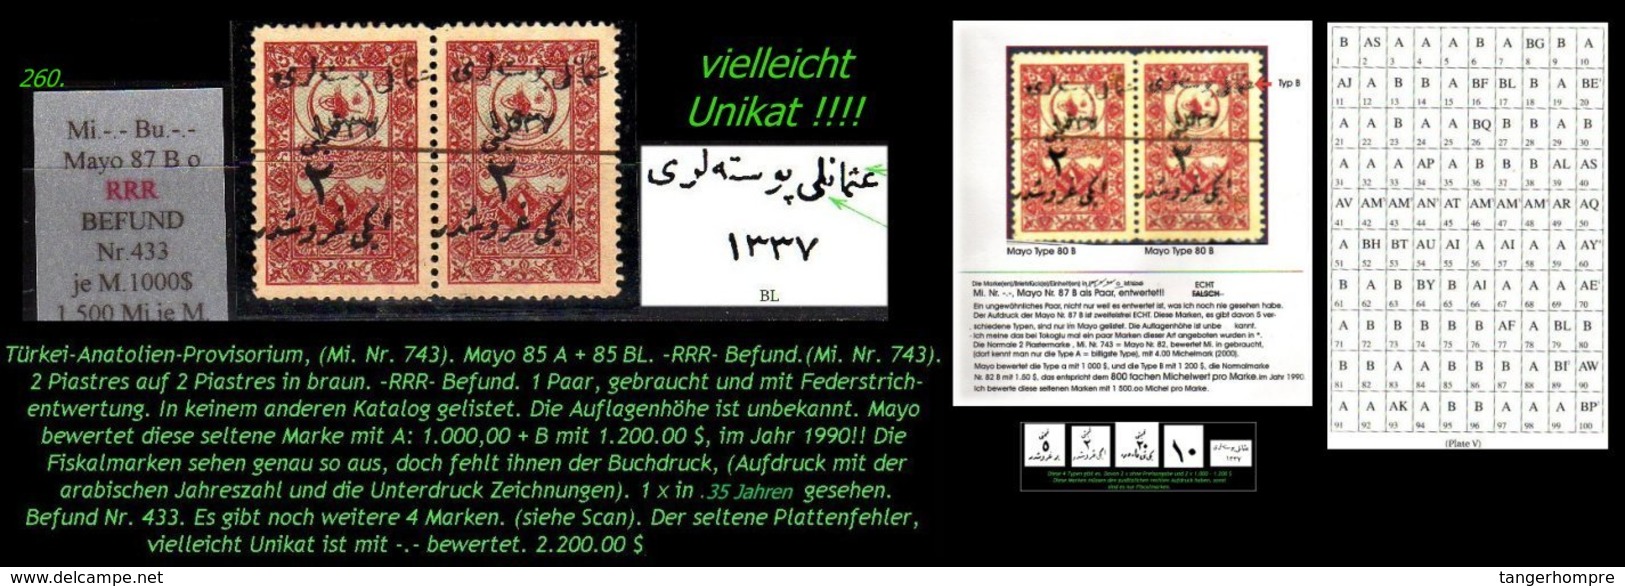 EARLY OTTOMAN SPECIALIZED FOR SPECIALIST, SEE...(Mi. Nr. 743) - Mayo 87 B + BL -RRRR- UNICAT ??? - 1920-21 Anatolie